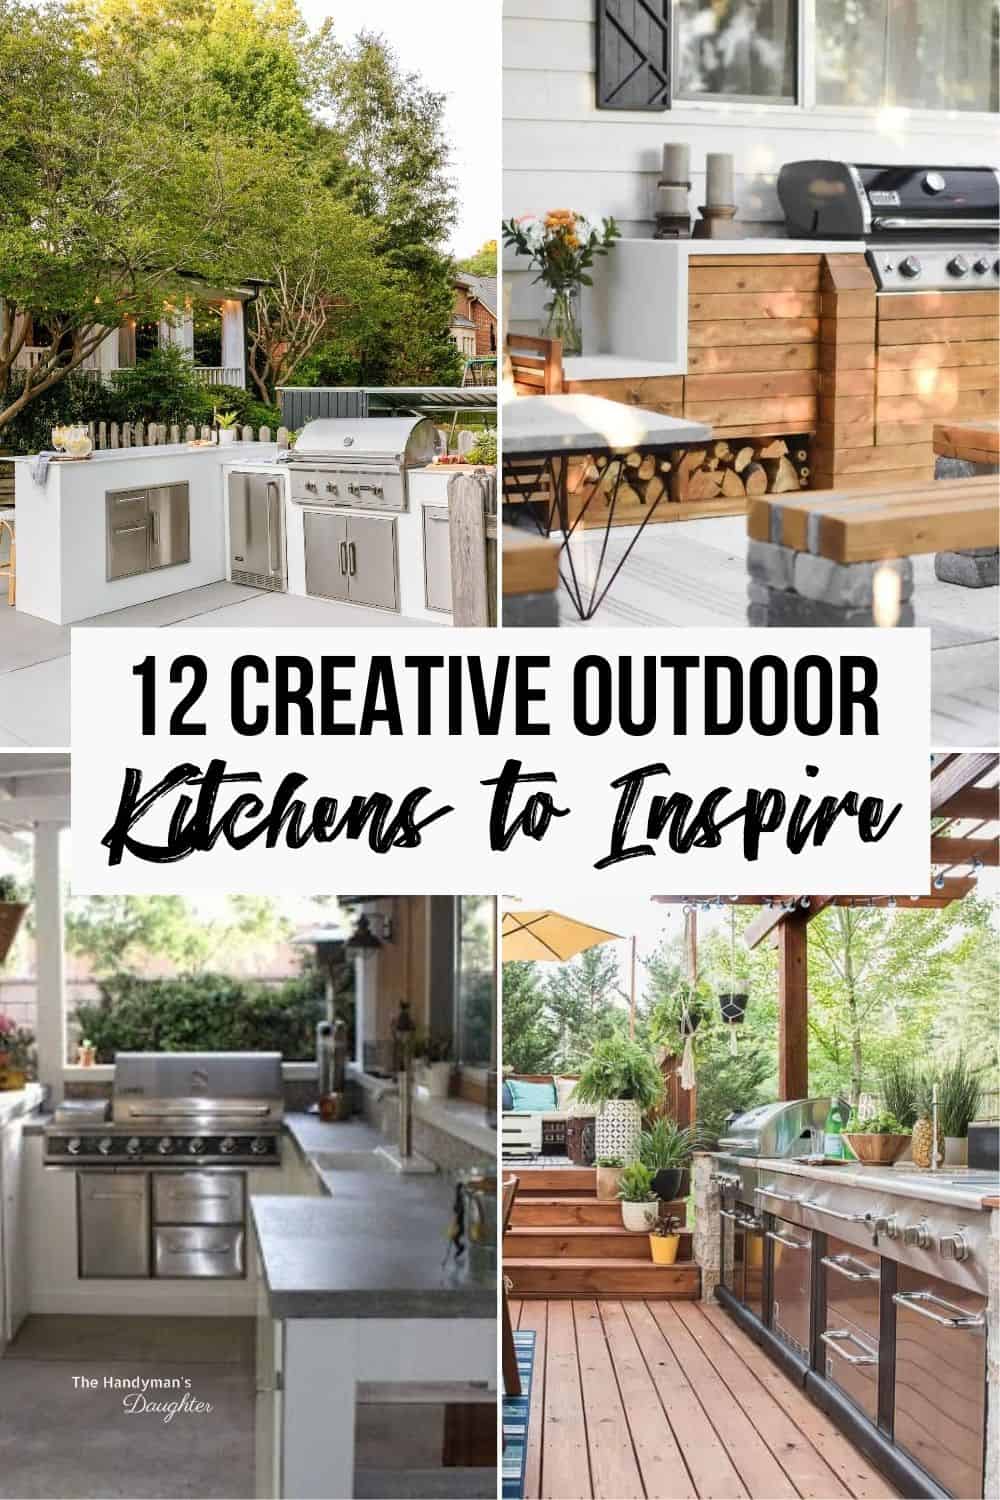 DIY outdoor kitchen ideas with collage of four different spaces